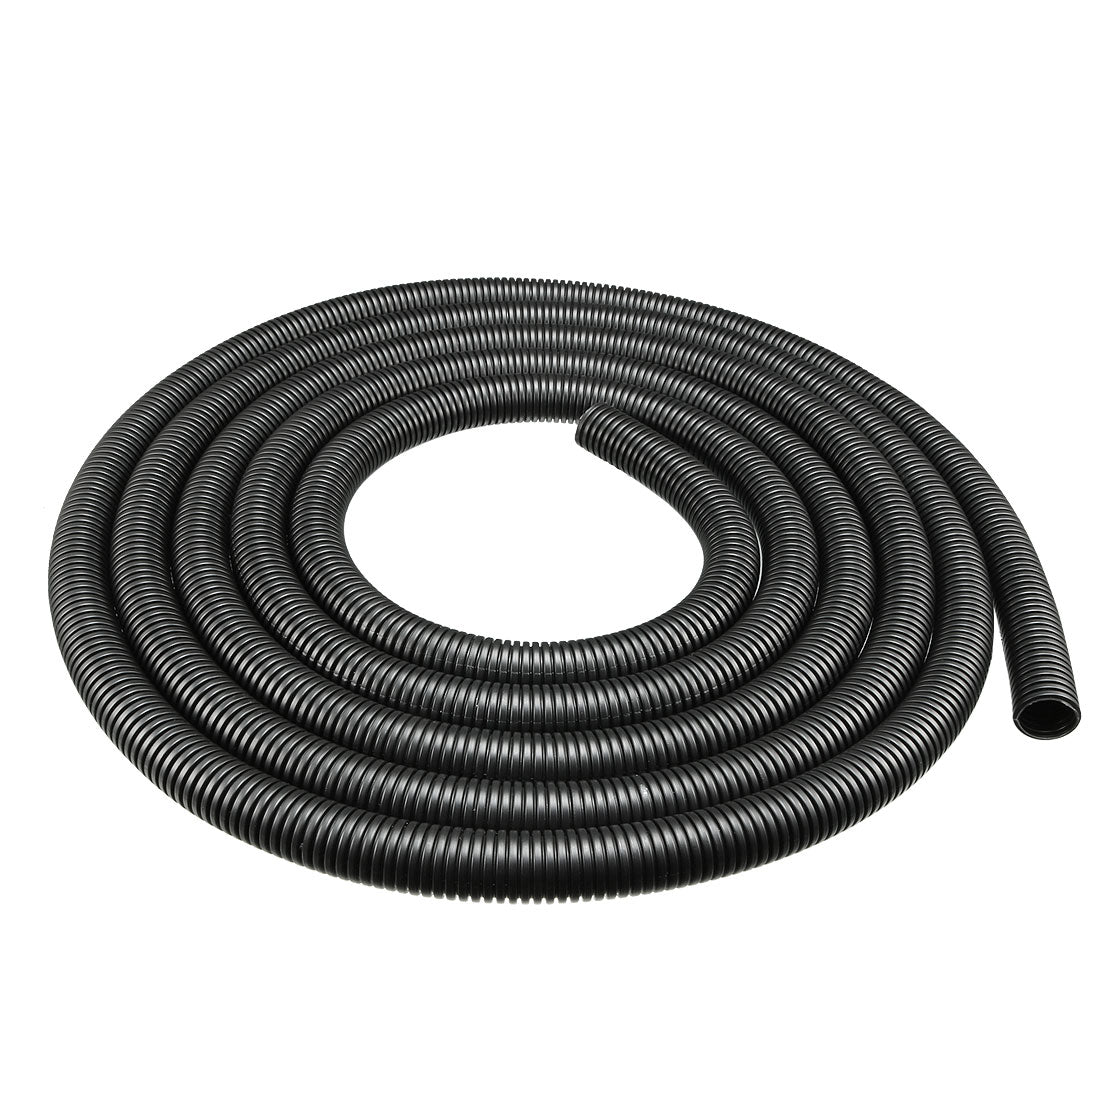 uxcell Uxcell 4 M 16 x 20 mm PP Flexible Corrugated Conduit Tube for Garden,Office Black